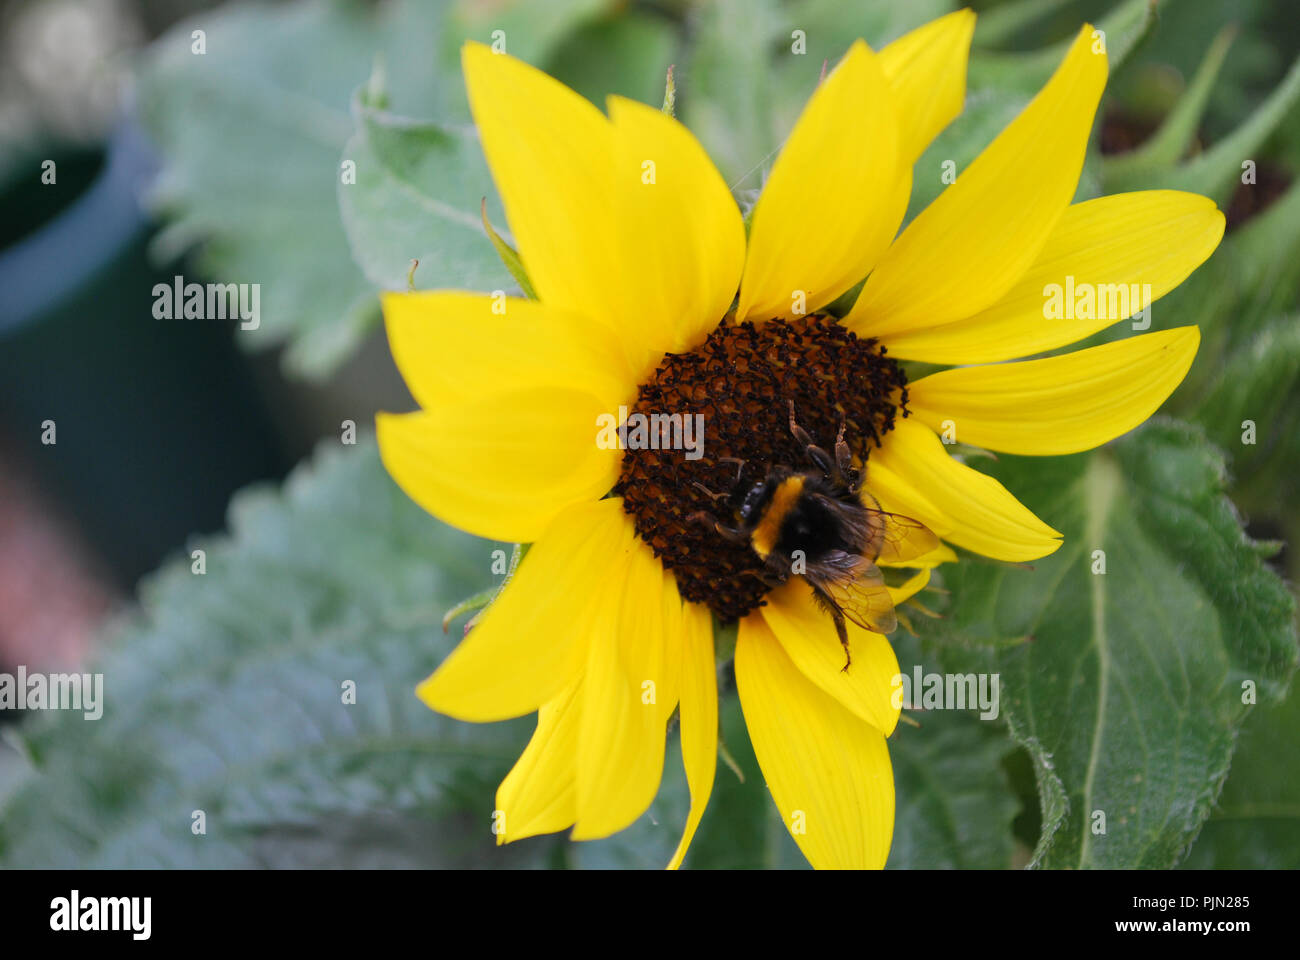 bumble bee lands on sunflower Stock Photo